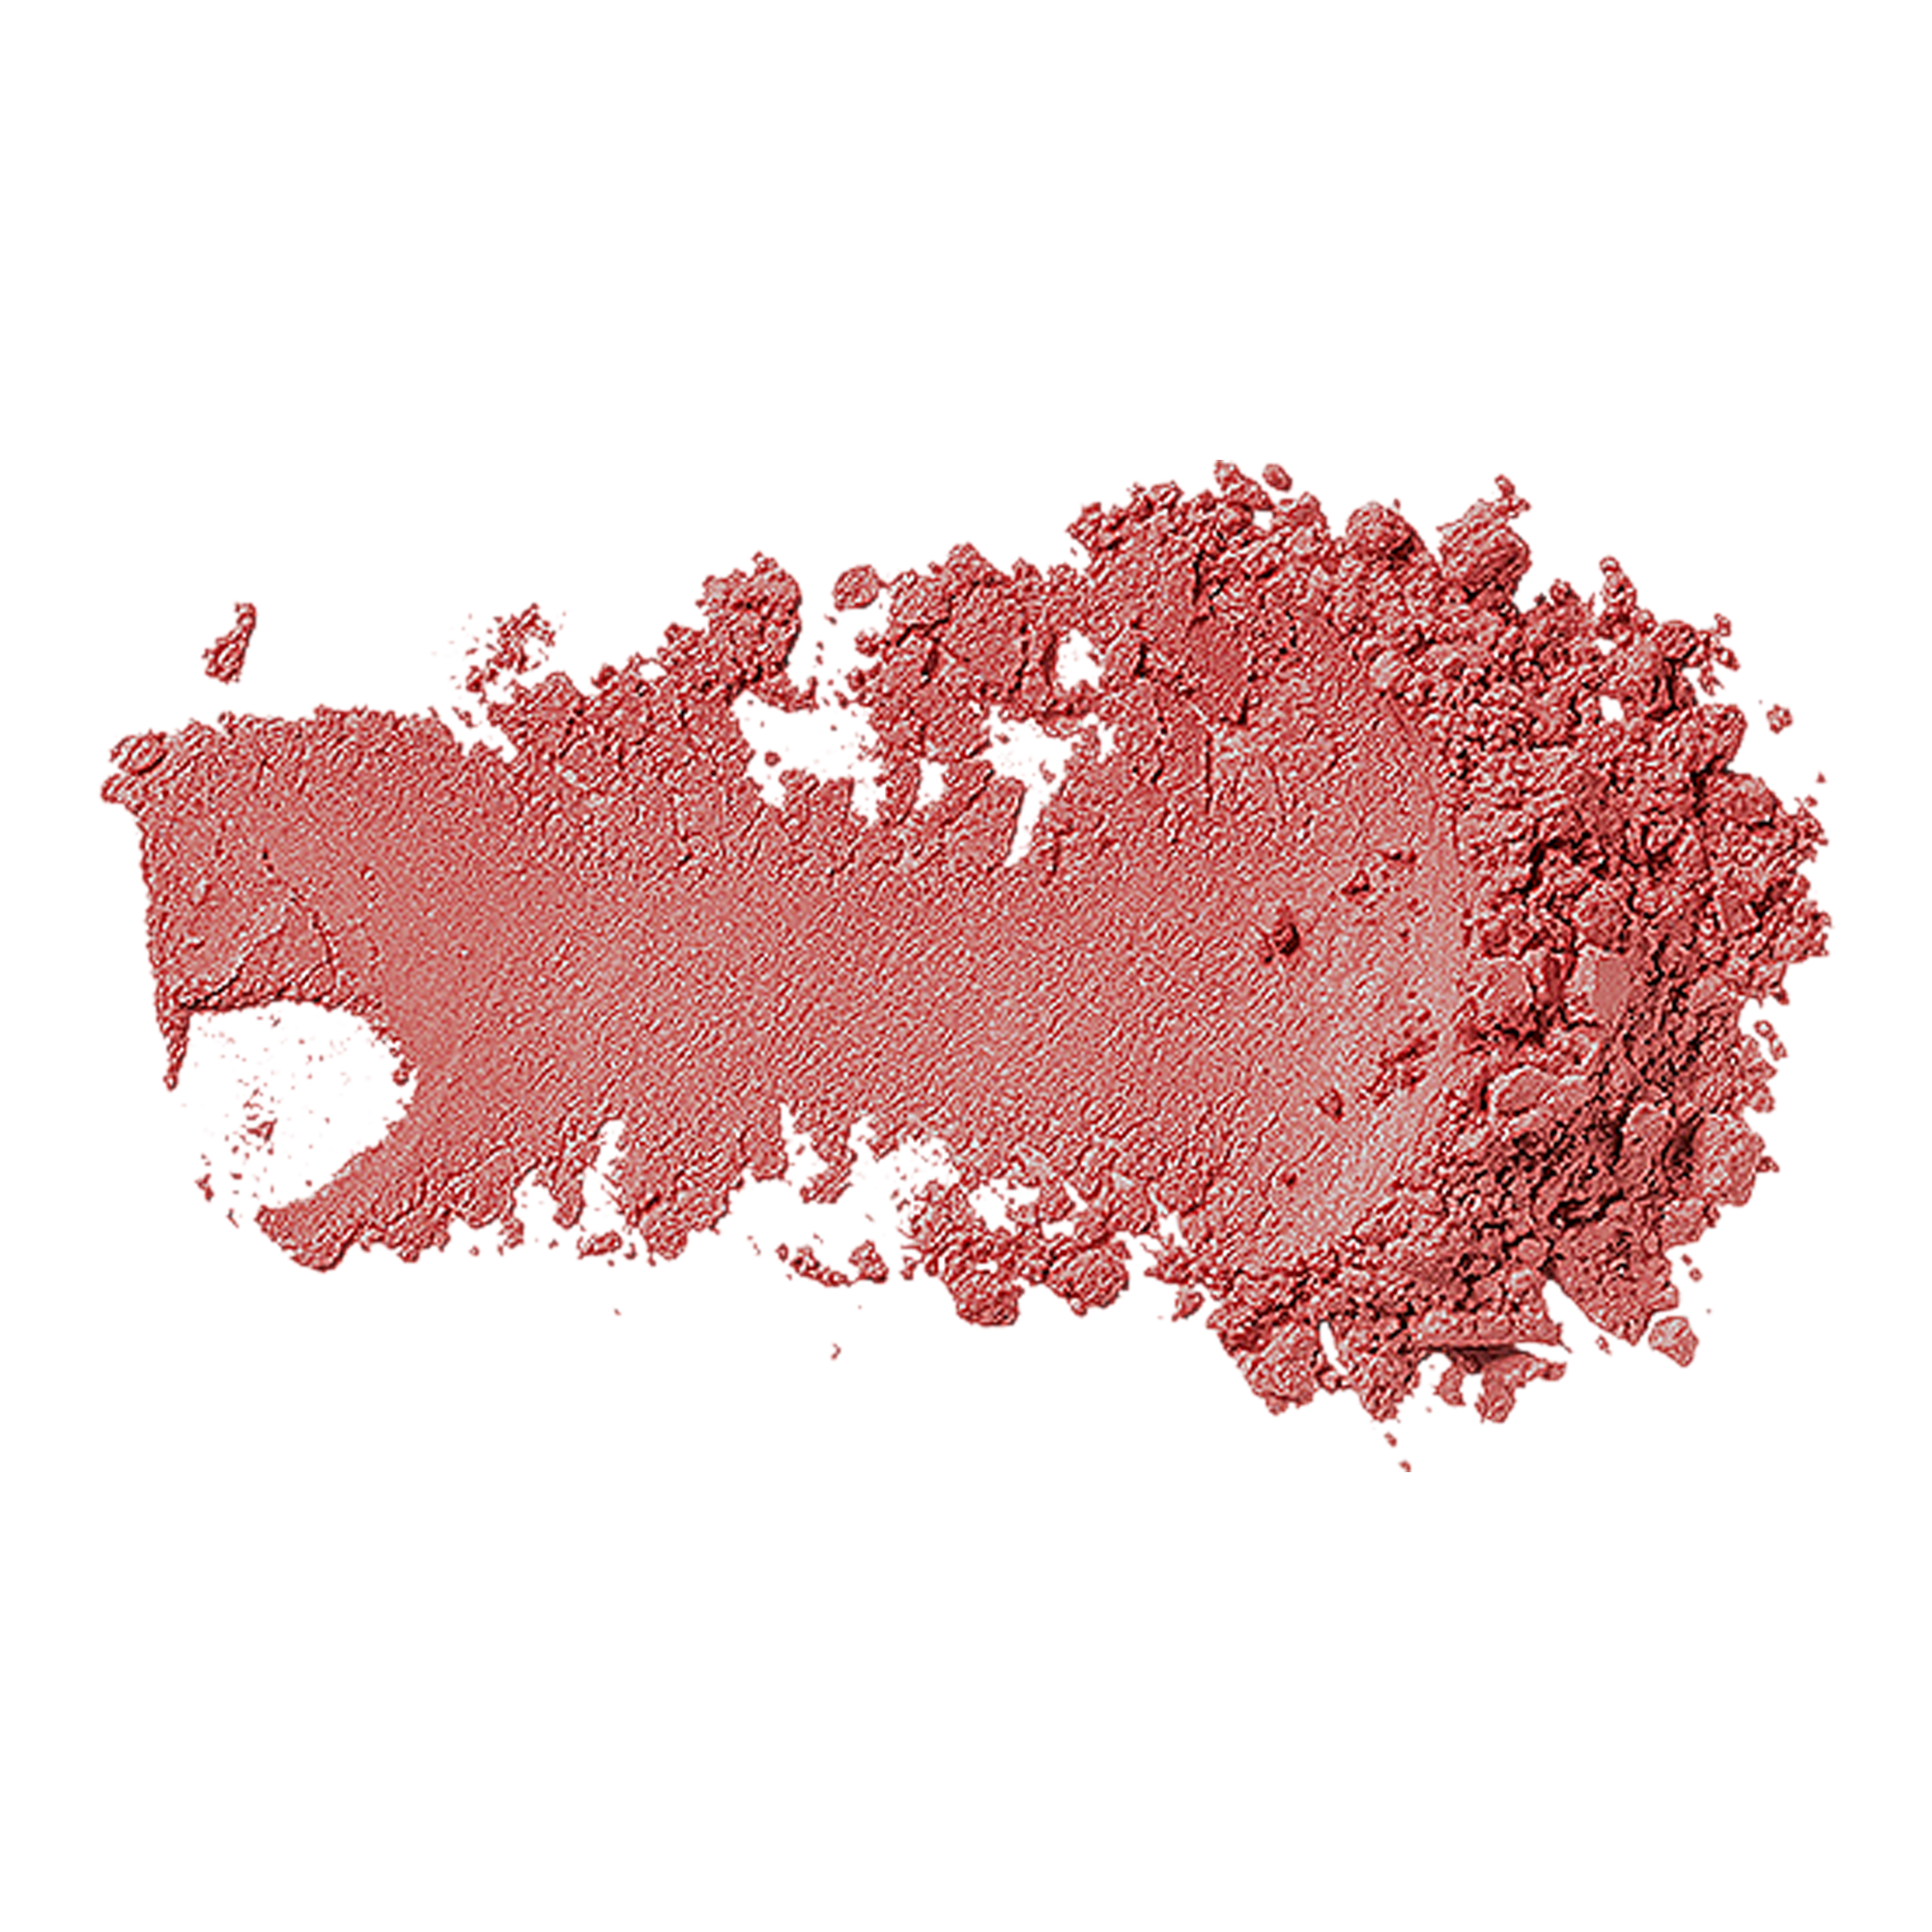 Bare Minerals Loose Blush / Beauty / Swatch